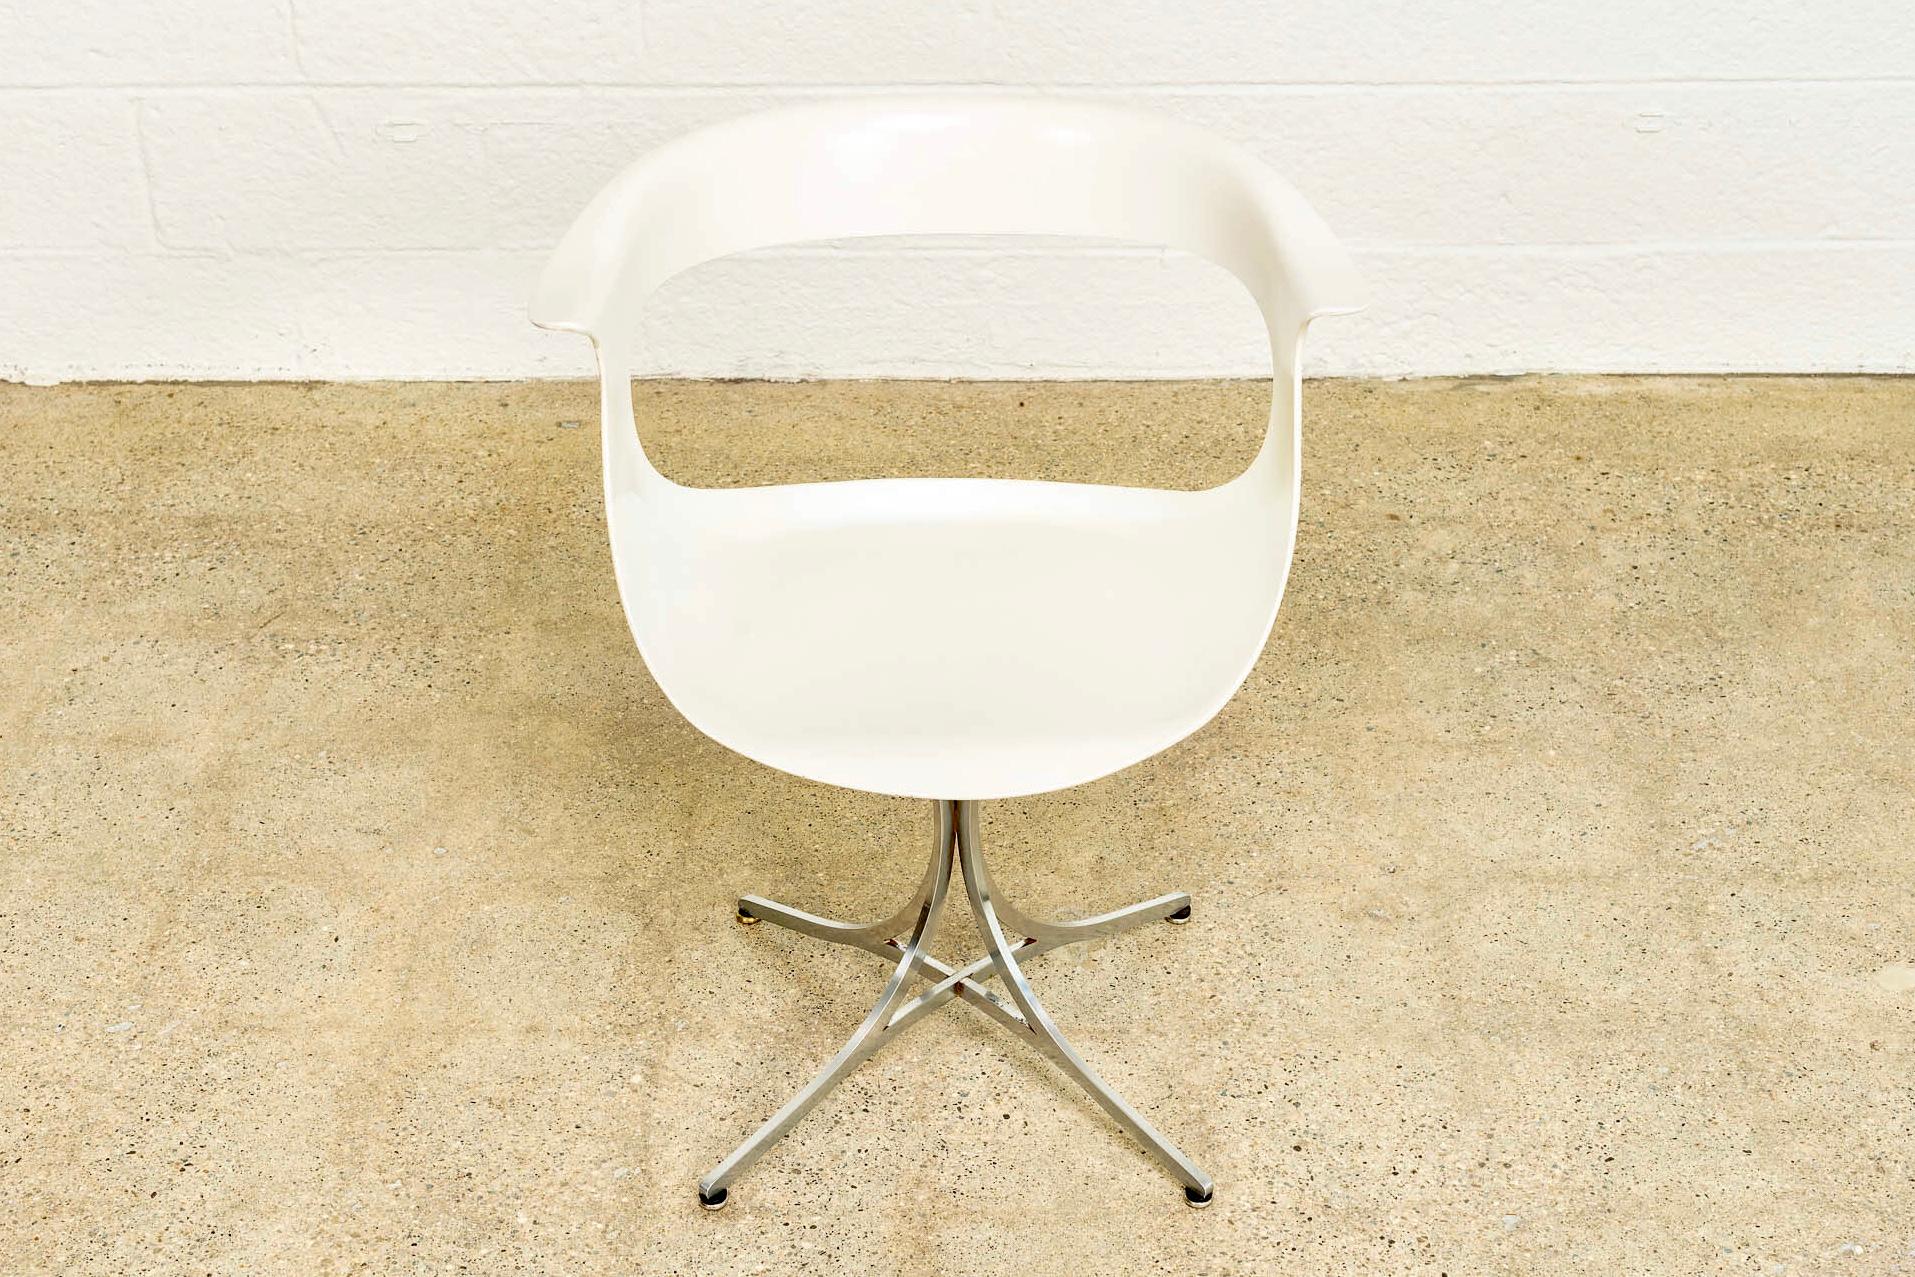 Midcentury Laverne White Fiberglass and Chrome Lotus Armchair, 1950s For Sale 3